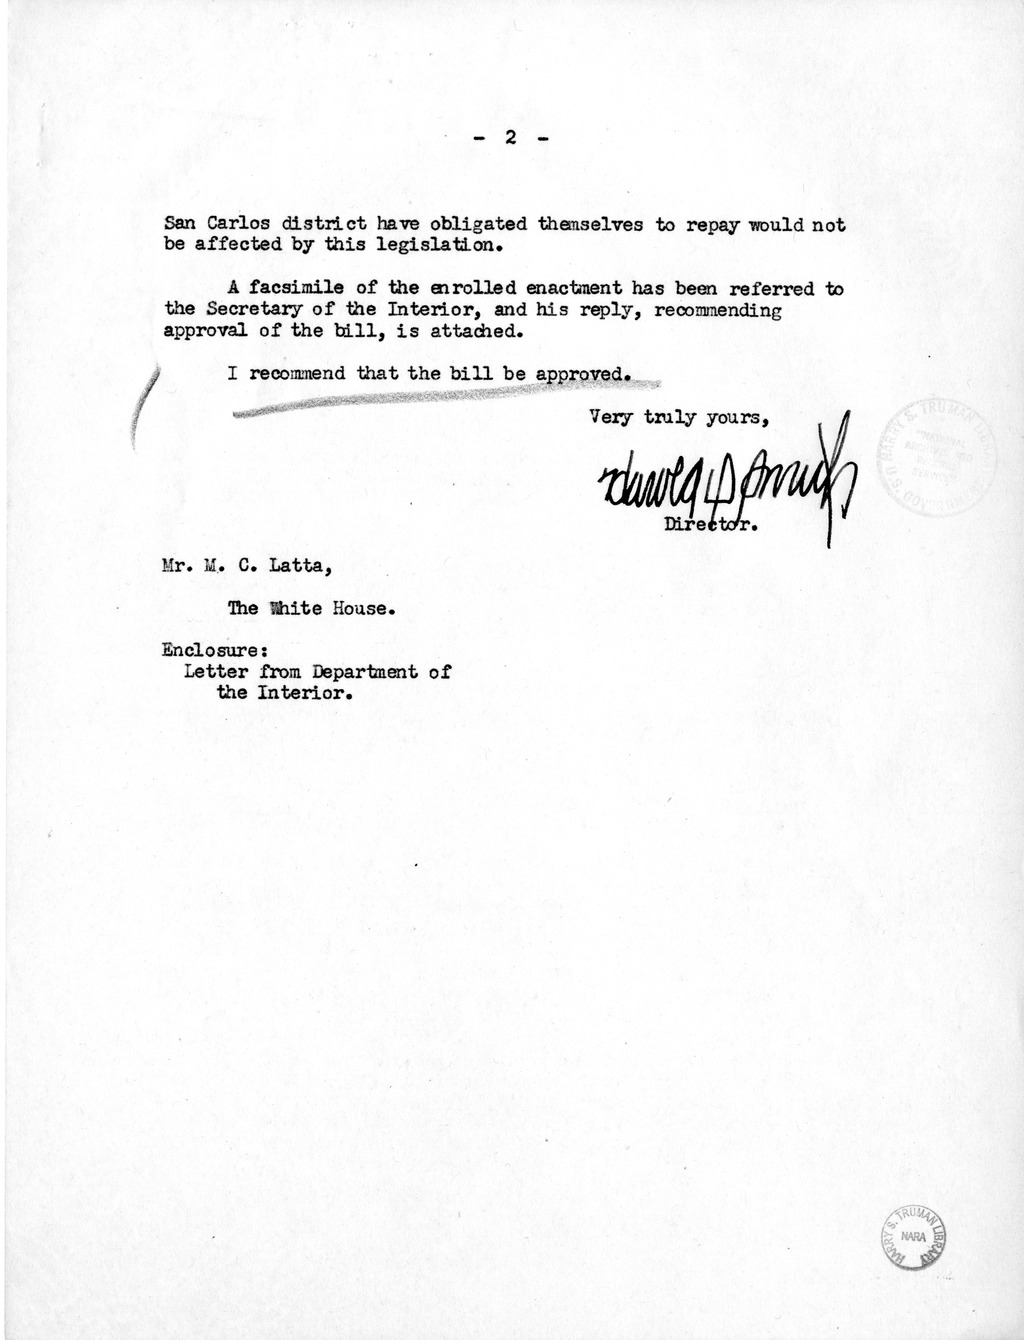 Memorandum from Harold D. Smith to M. C. Latta, S. 812, To Amend Section 3 of the San Carlos Act (43 Stat. 475-476) as Supplemented and Amended, and for Other Purposes, with Attachments